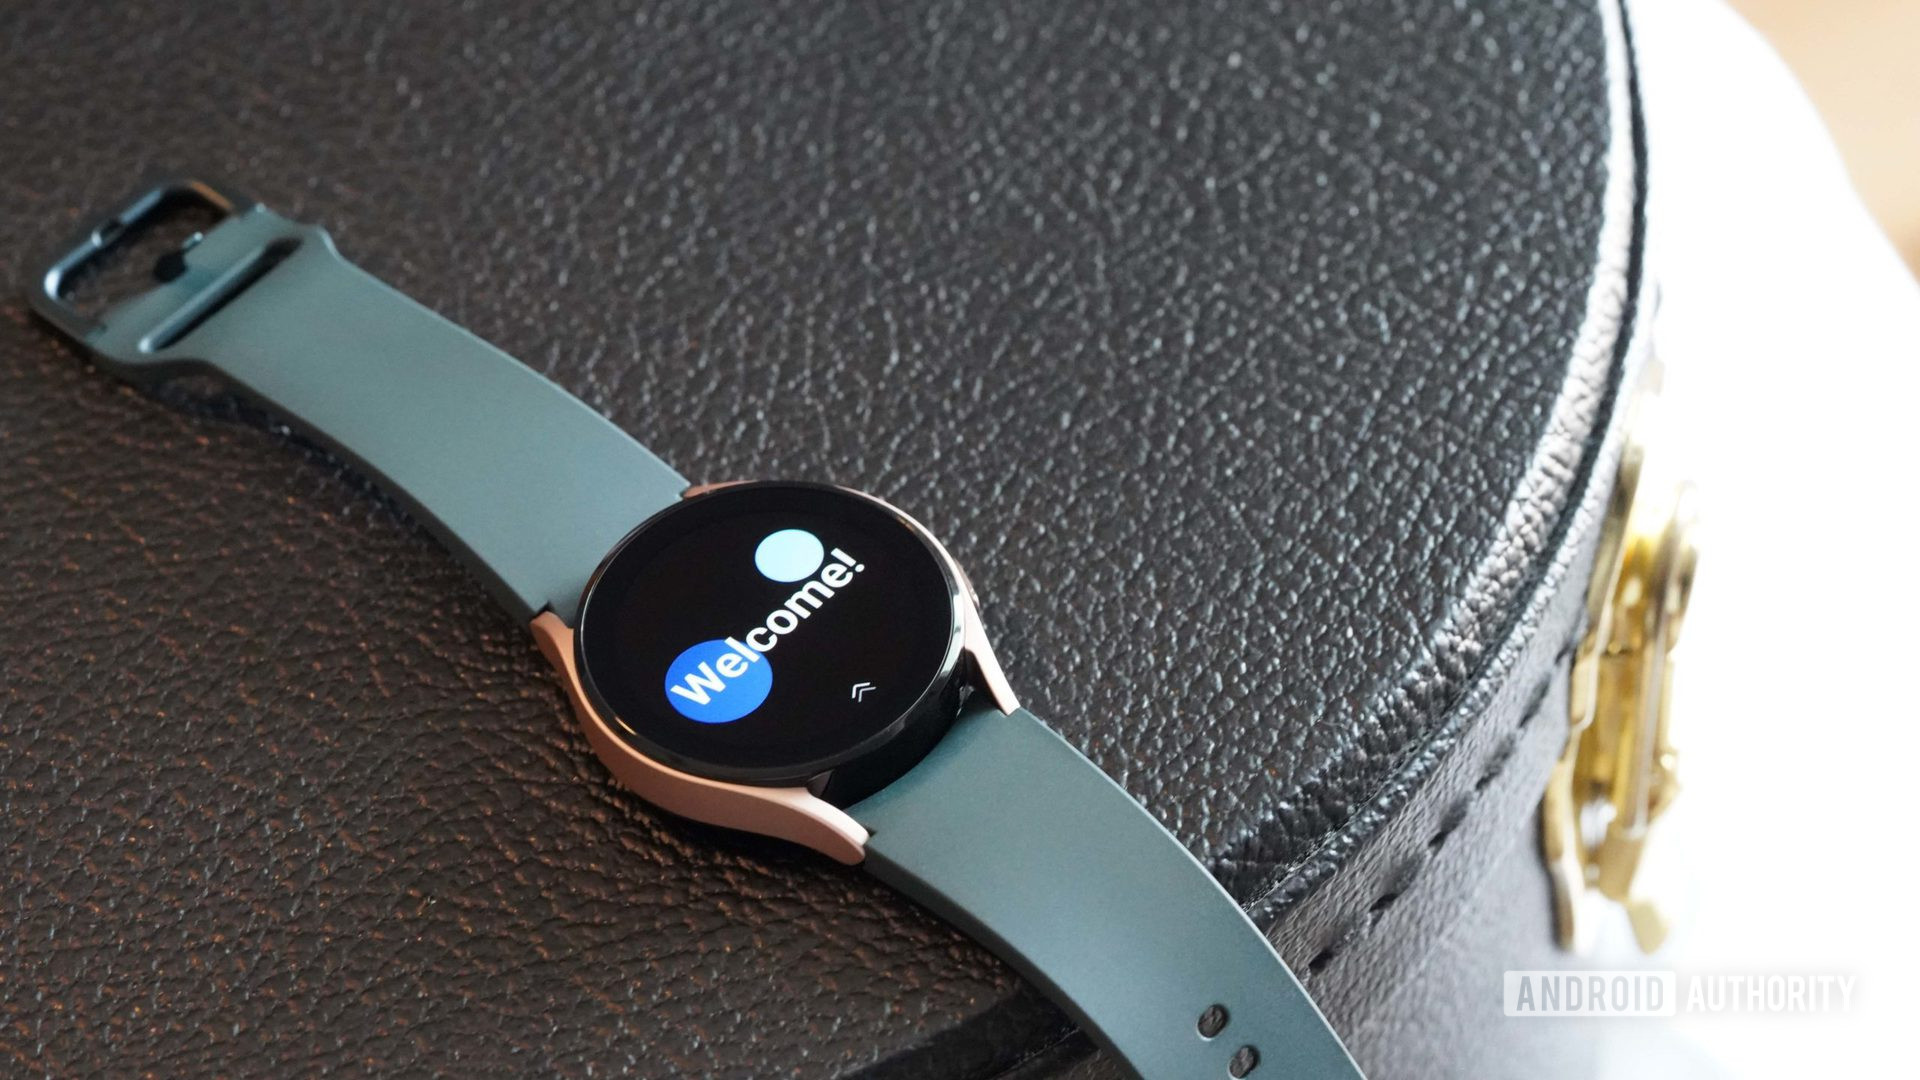 A Samsung Galaxy Watch 4 rests on a black leather case with the watches splash screen.